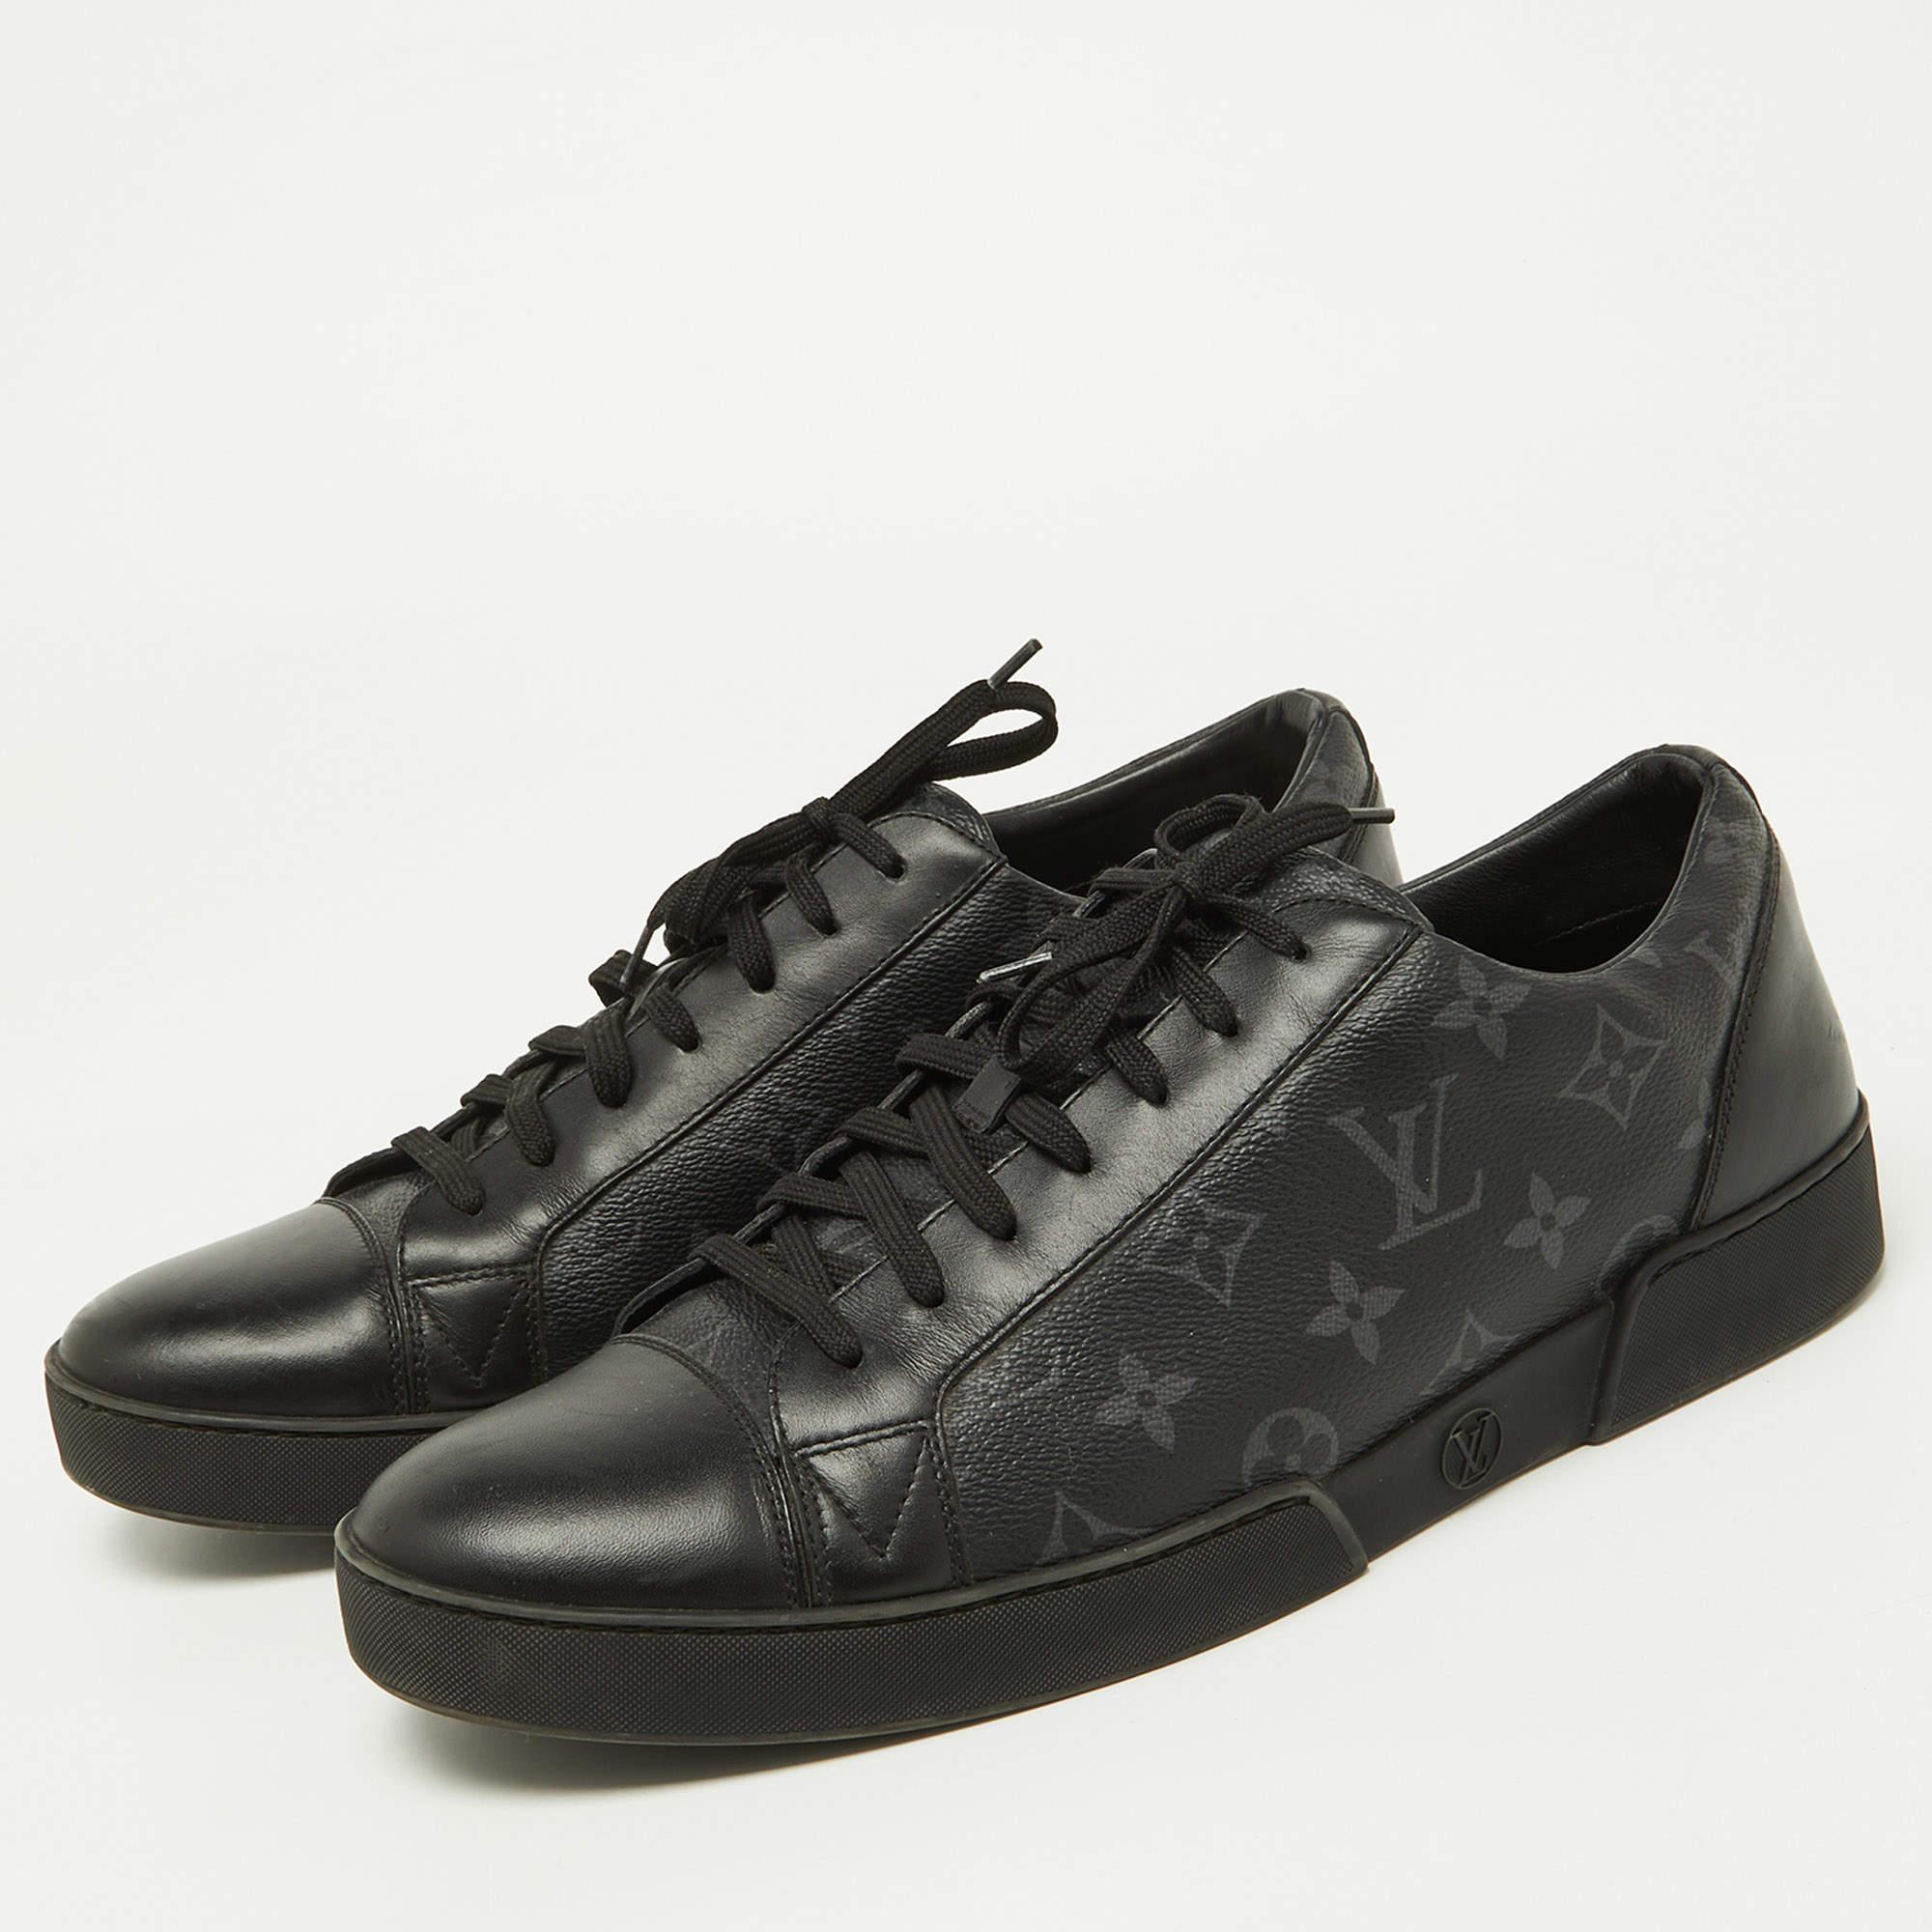 Designed to elevate your style quotient and give you comfort at the same time, these LV black sneakers are crafted using the best materials. Pair them with your casuals for a cool look.

